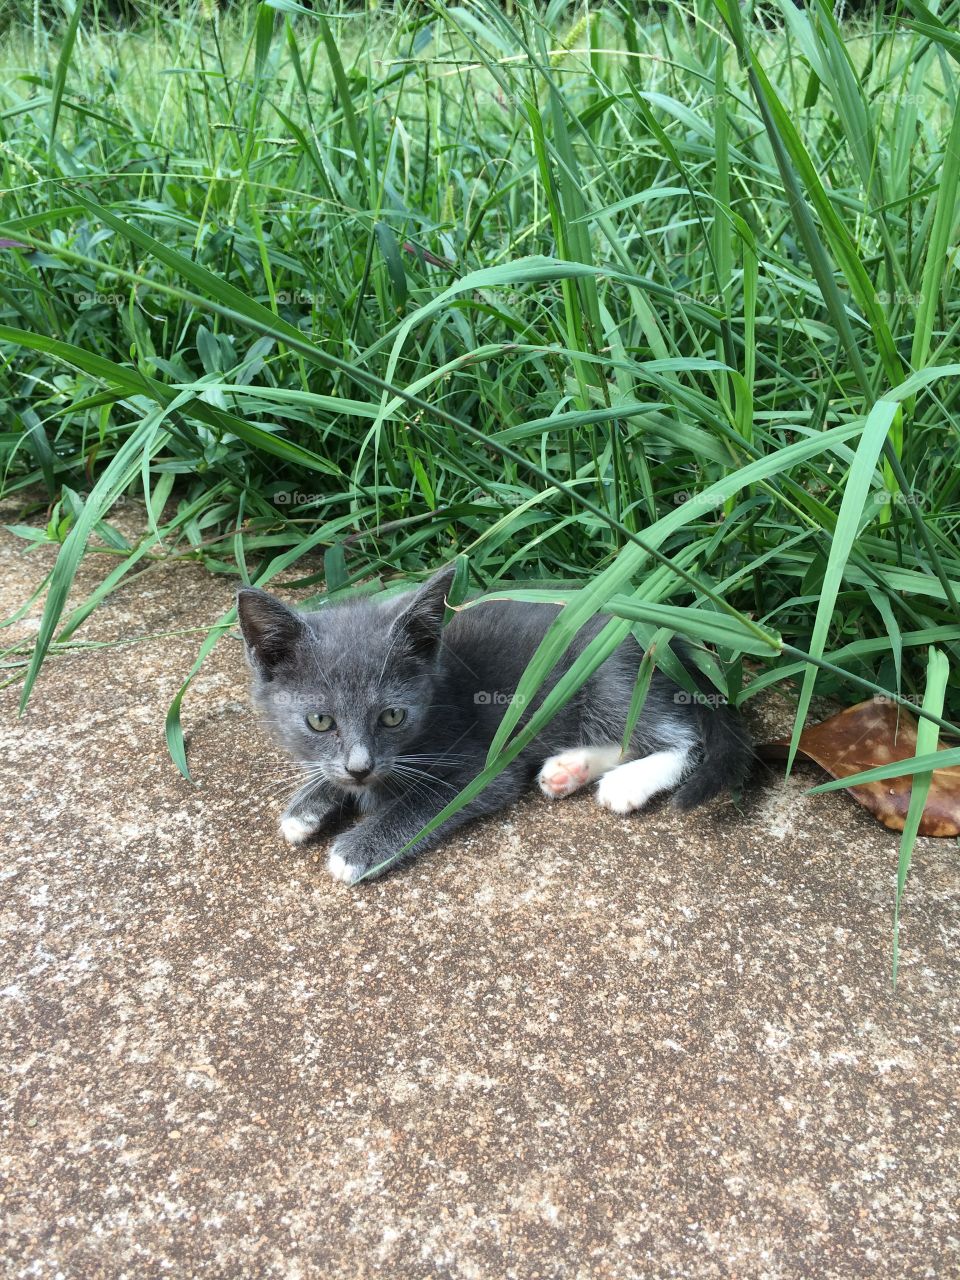 Jungle Kitty. Sweet little gray kitten thinks its hiding in the tall grass. Its a good place for a playful kitty to that a rest break.